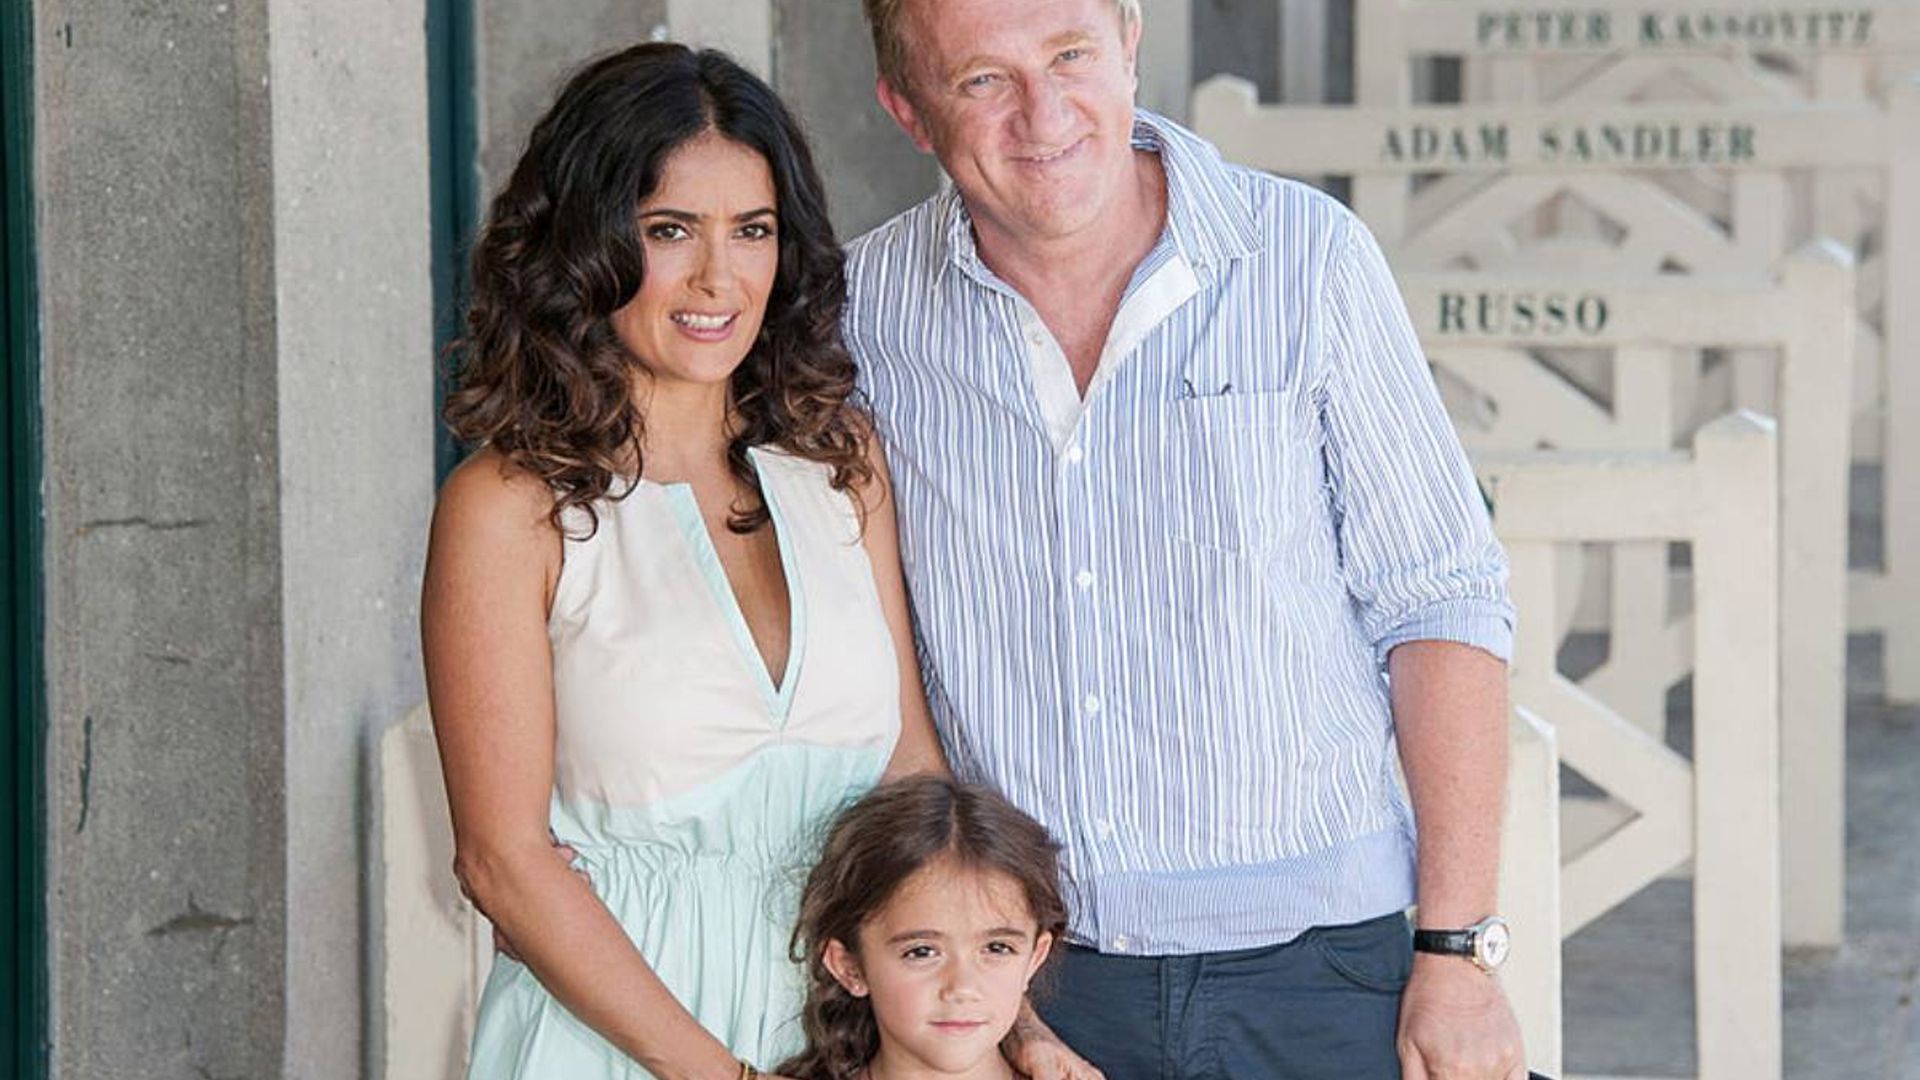 Salma Hayek and lookalike daughter's unusual living situation revealed